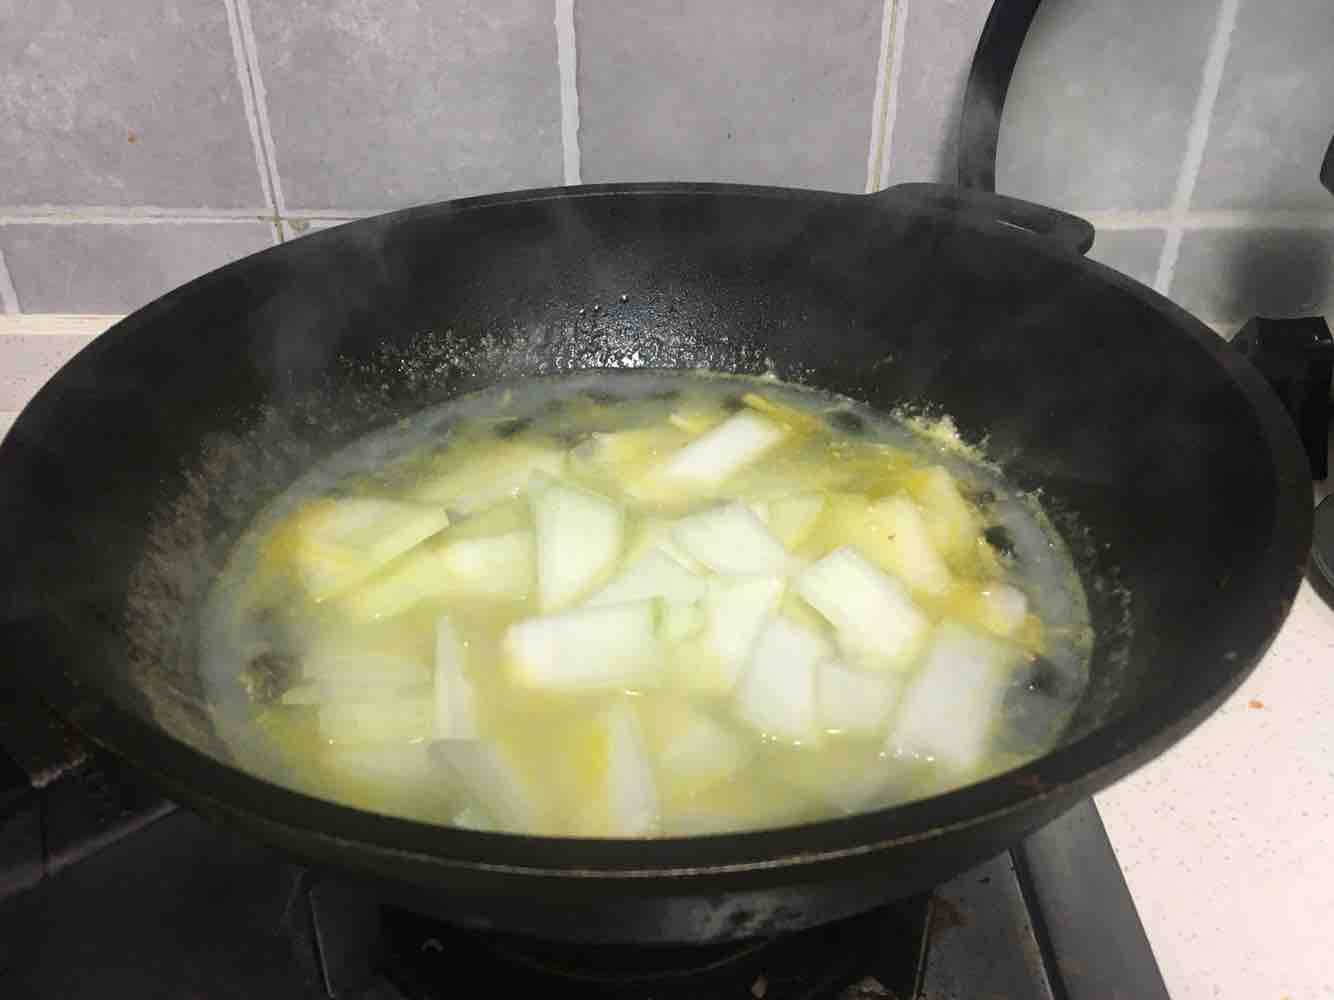 Winter Melon Soup with Preserved Egg recipe